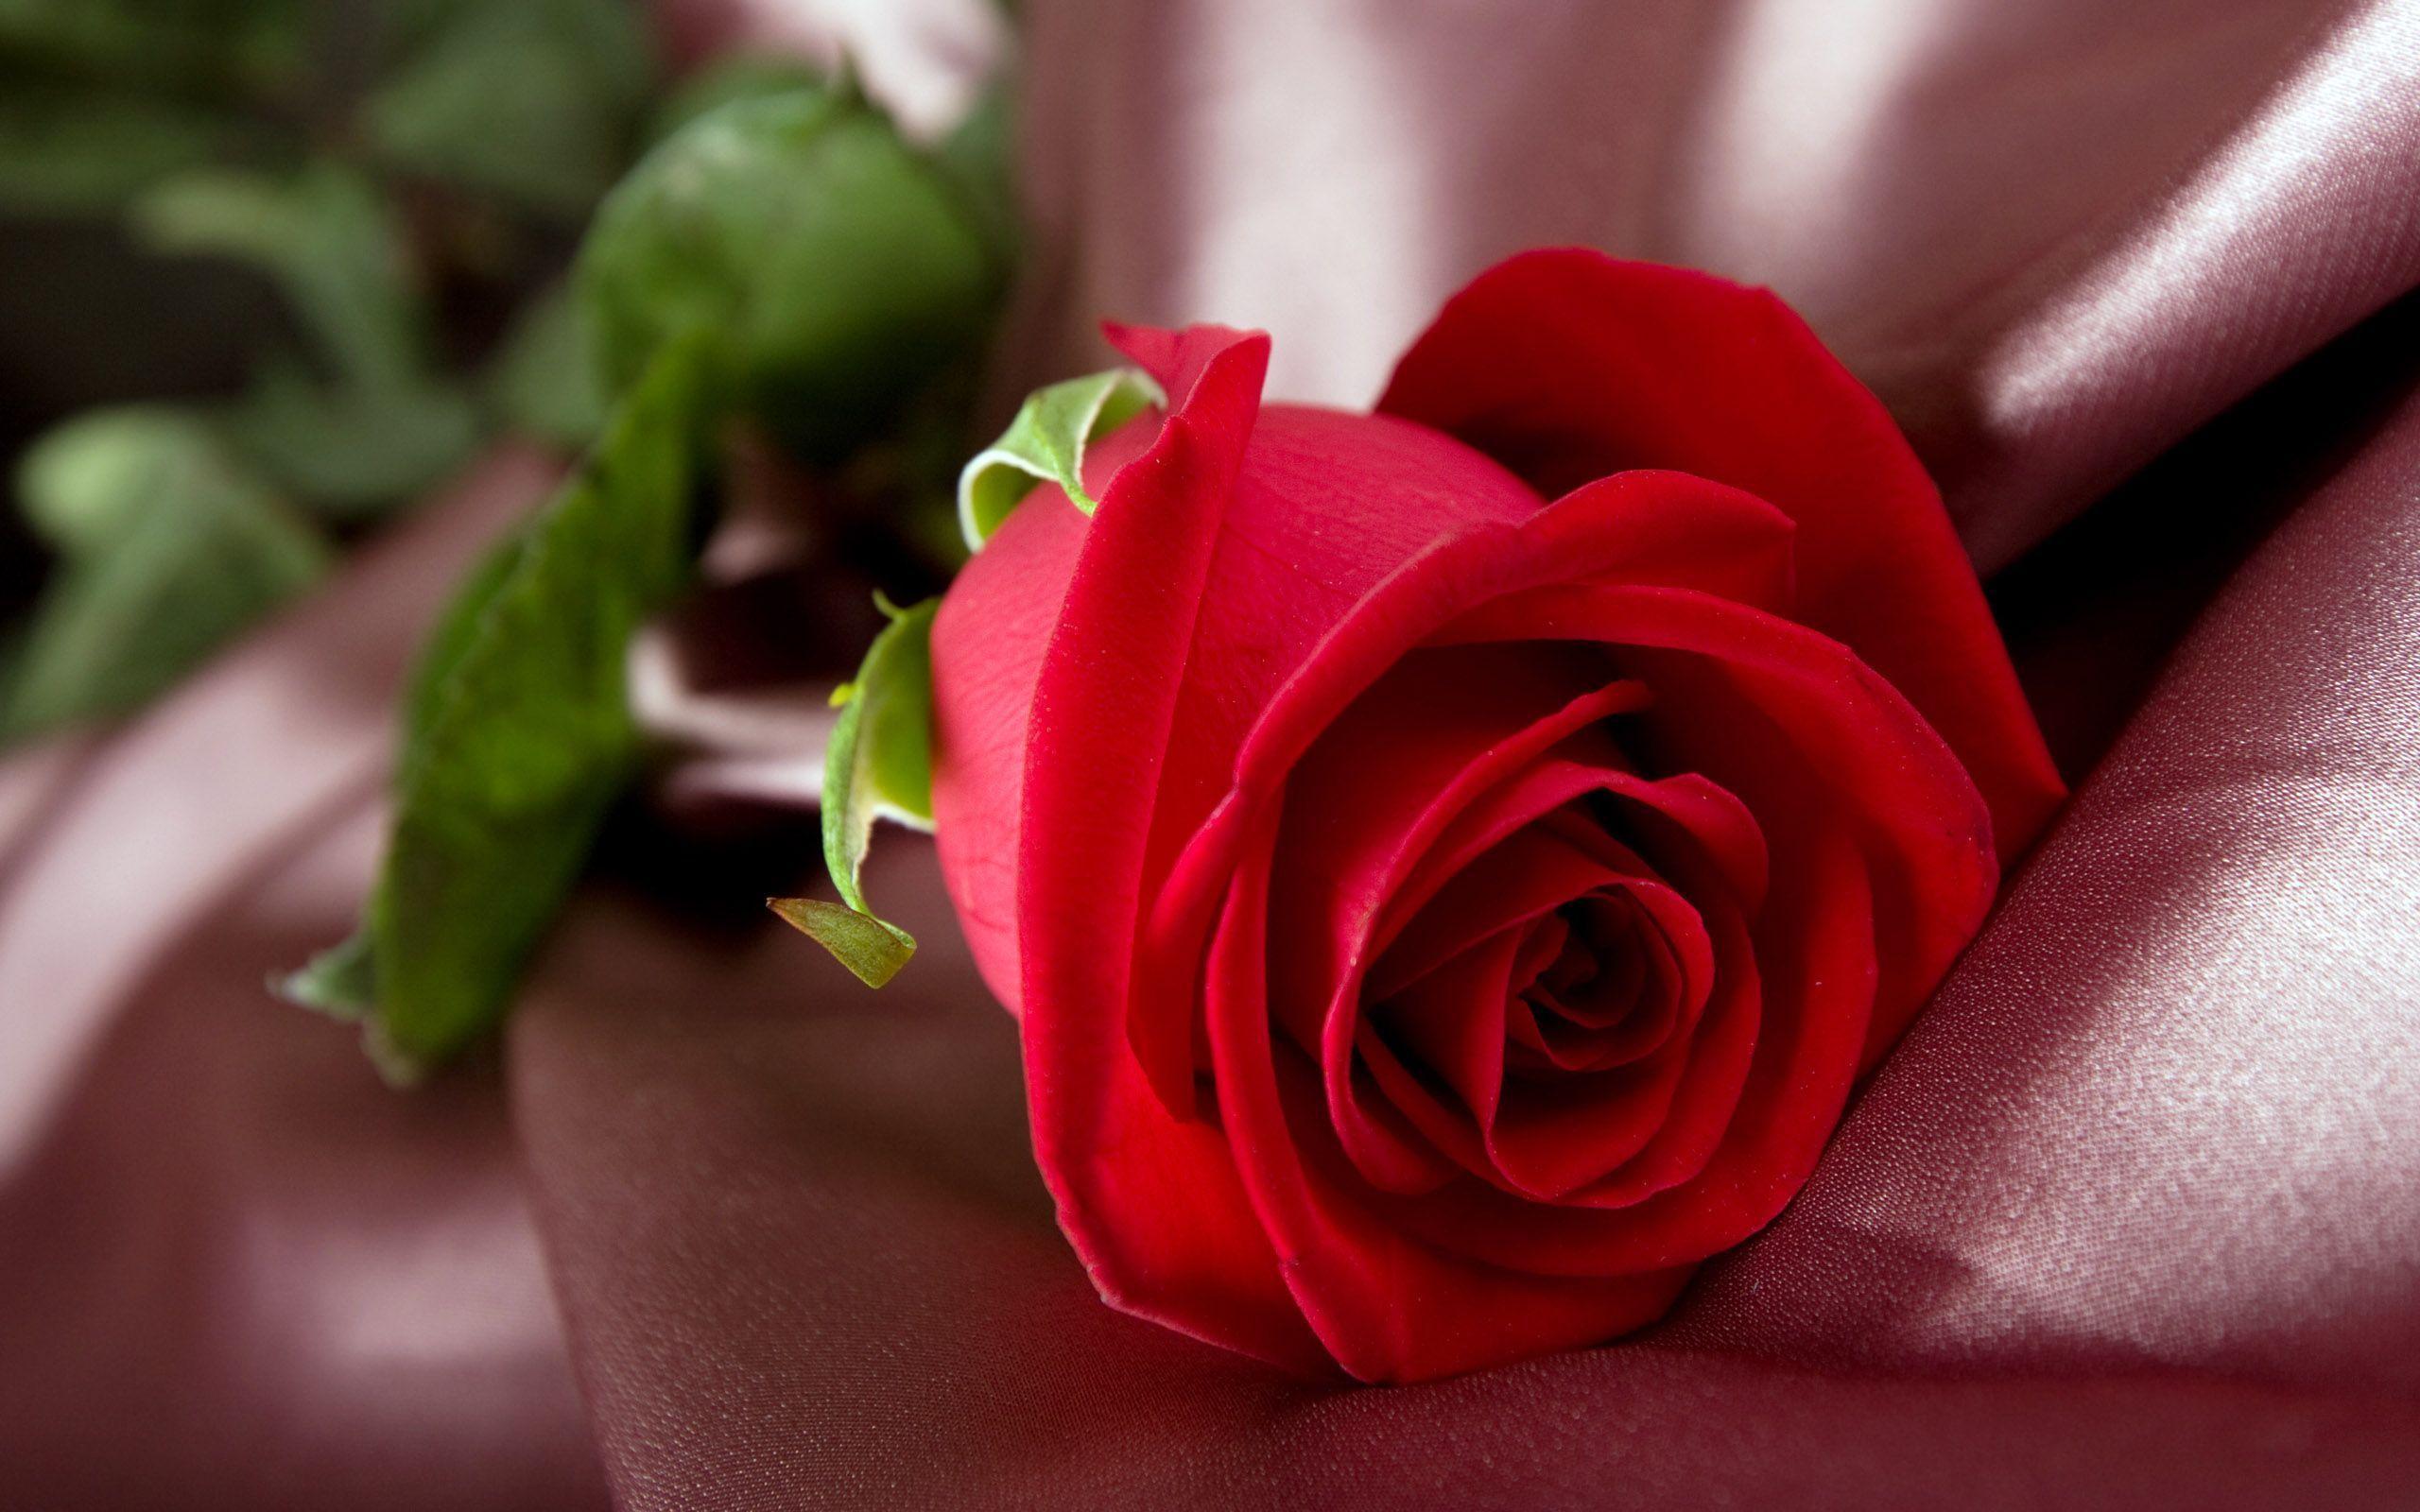 Awesome Red Rose Flower Macro Wallpaper HD Wallpaper. High